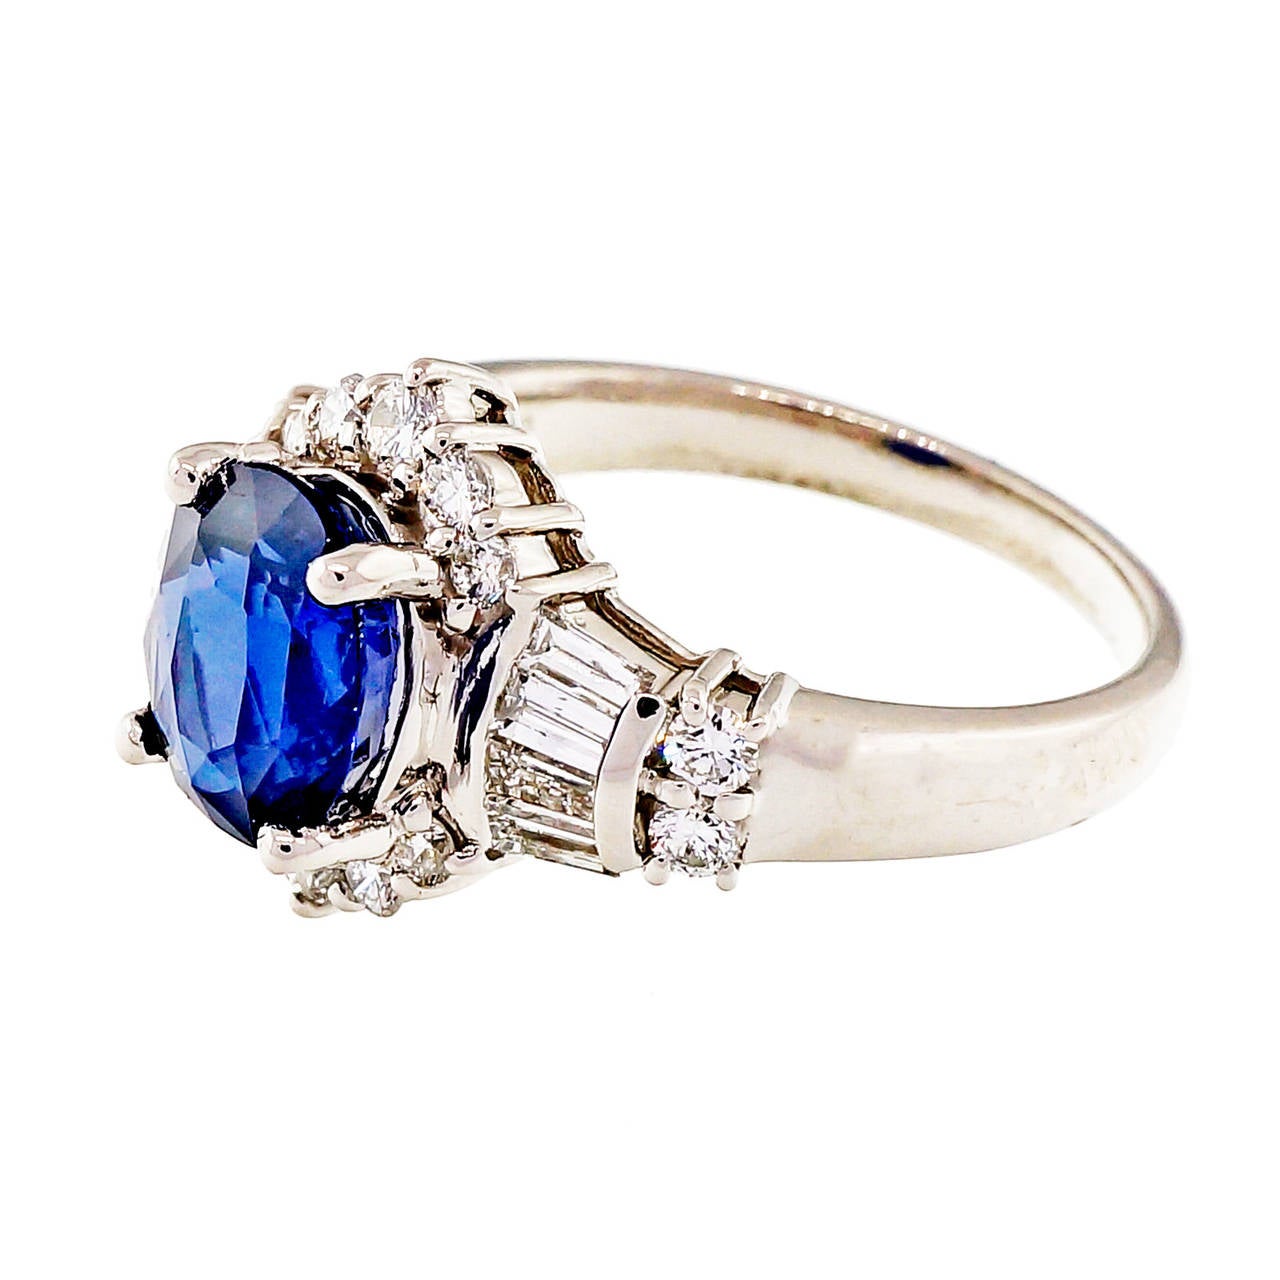 Beautiful bright pure blue oval Sapphire in a handmade Platinum setting. Top quality diamonds. Sapphire appears to be an older cut. Top gem blue cornflower color and very bright internally, VS clarity. GIA certified as simple heat only. The ring